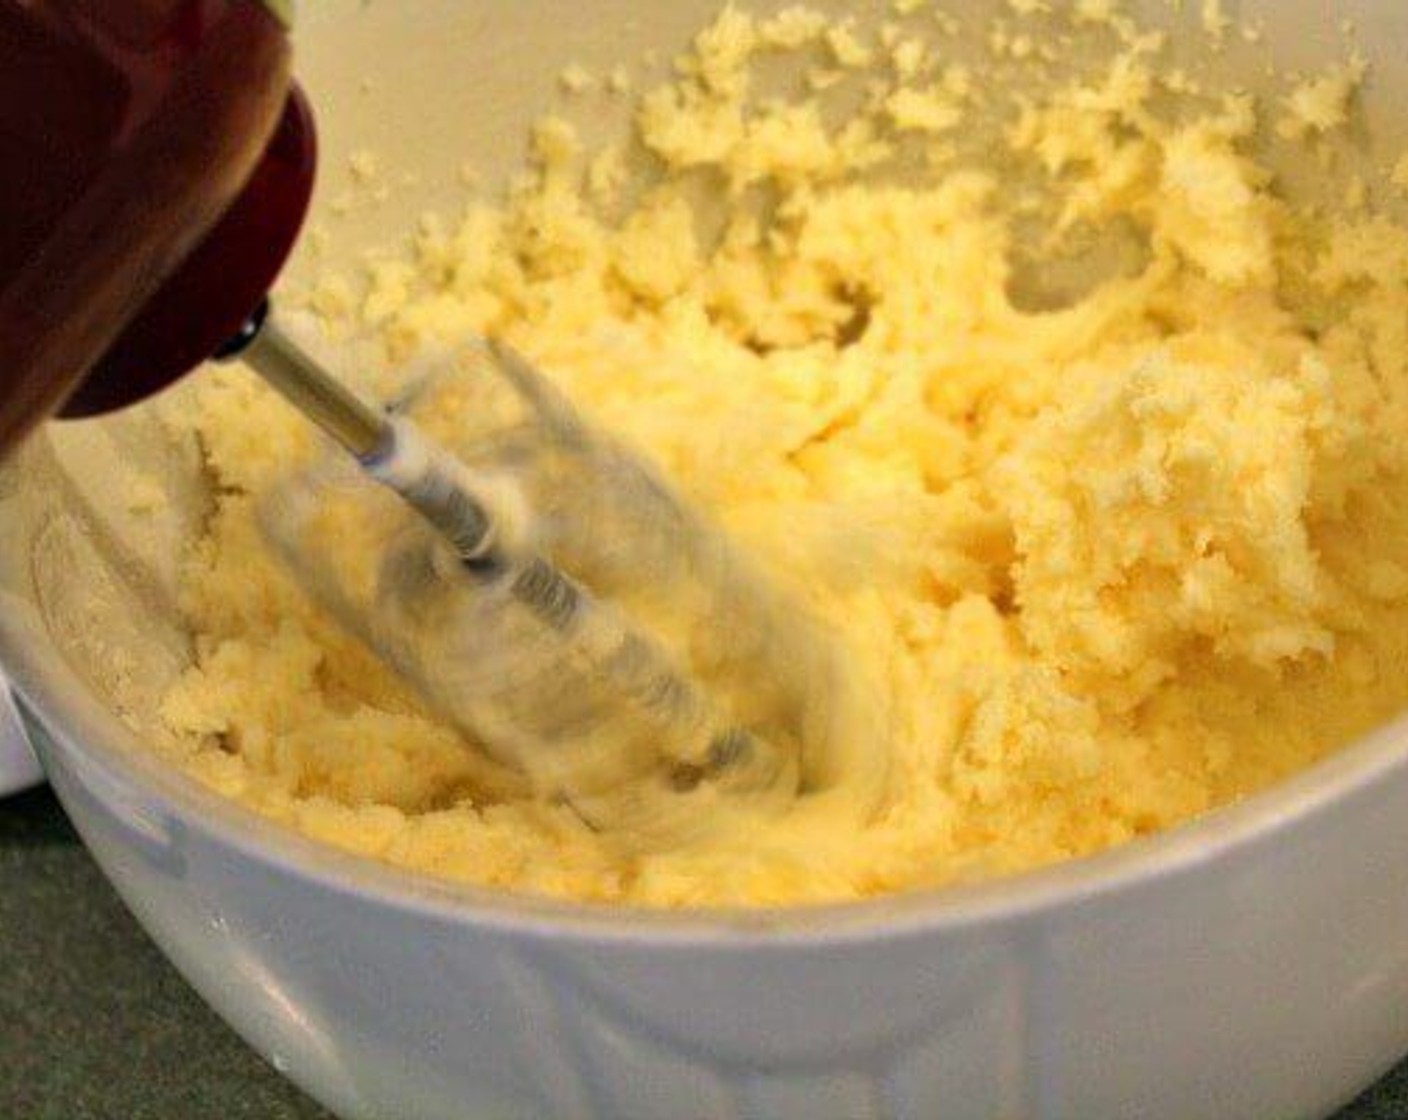 step 6 In a separate bowl, with a hand mixer, cream Butter (1 1/4 cups) and Granulated Sugar (2 cups) until light and fluffy, about 2 minutes. Beat in Eggs (2) one at a time. Add Vanilla Extract (1/2 Tbsp). Combine well.